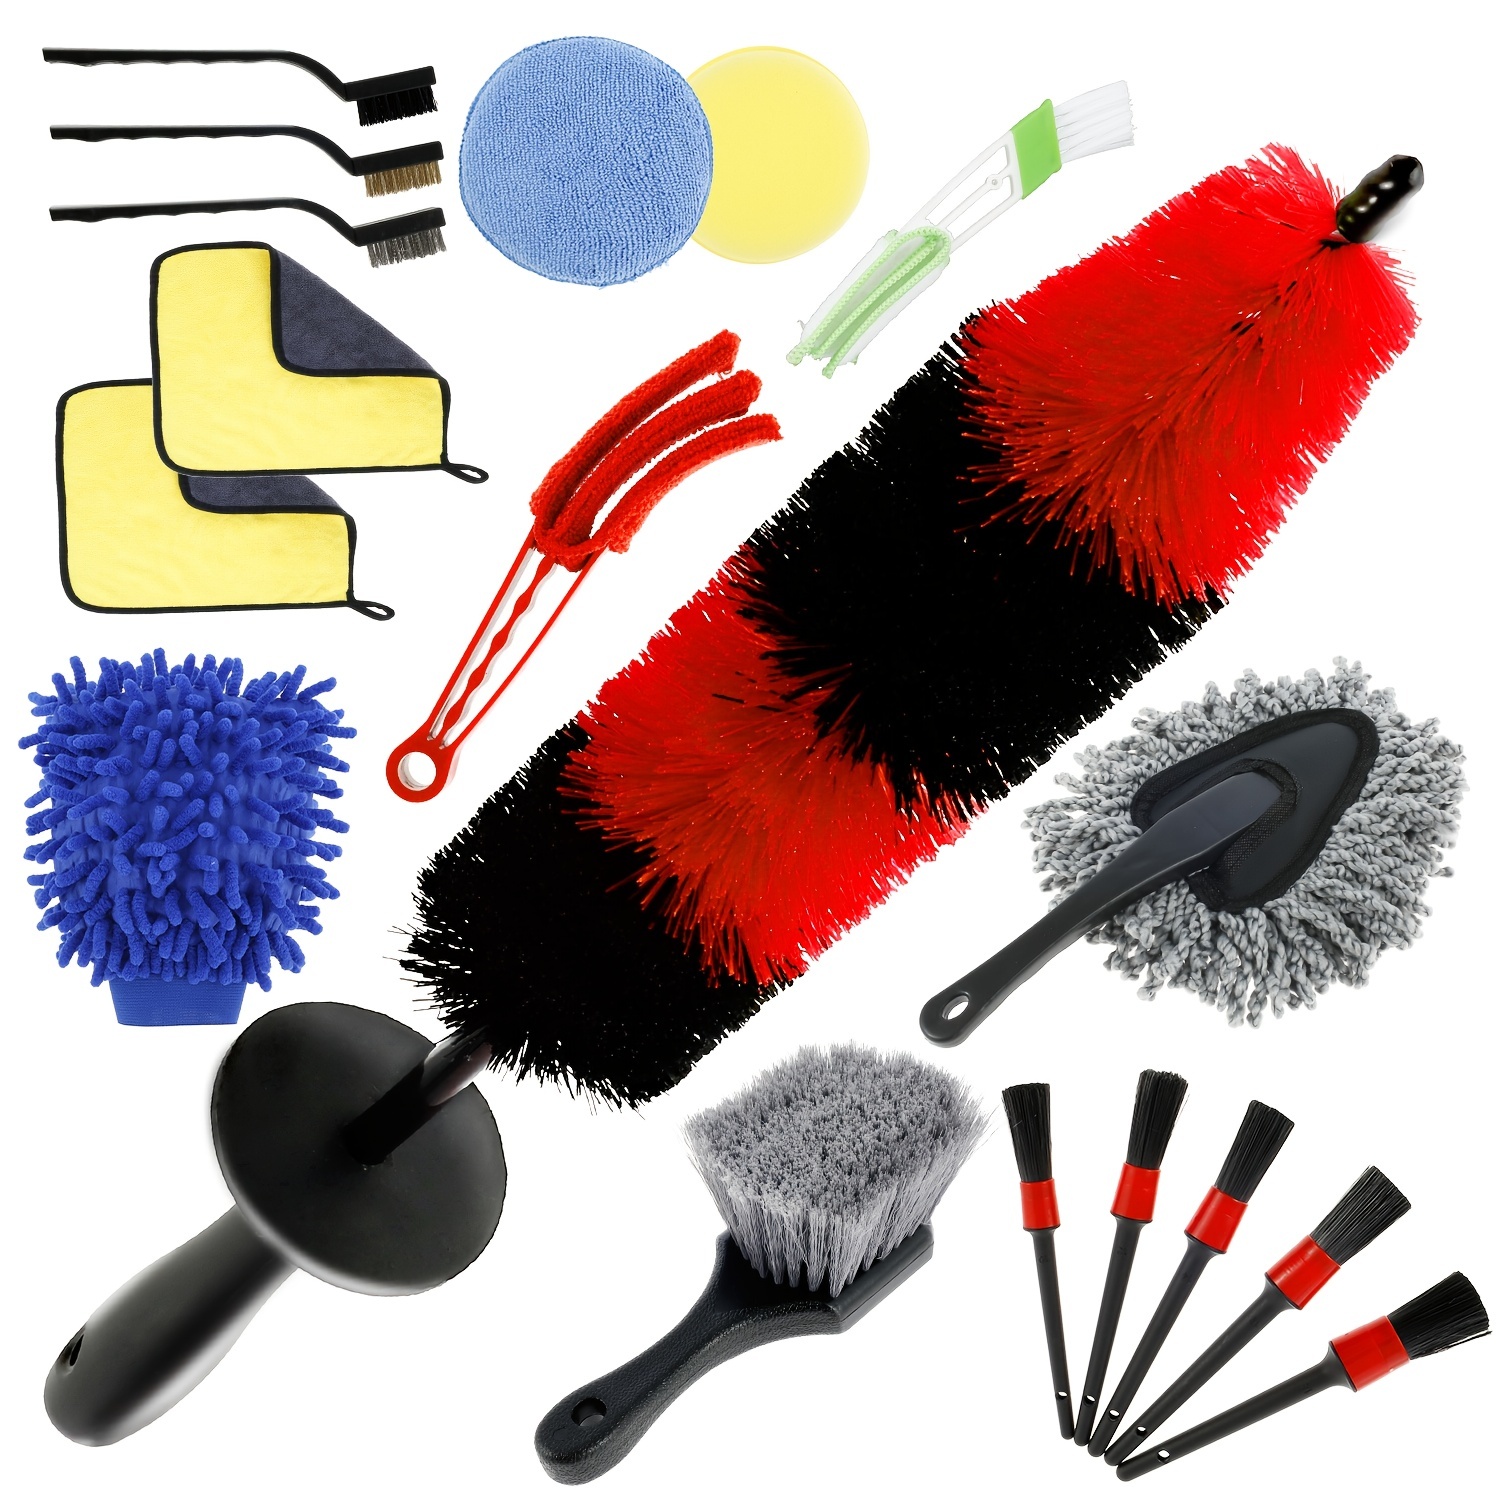 18Pcs Car Wheel Brush Set - High-quality Car Detailing, Cleaning, Leather, Air Vents